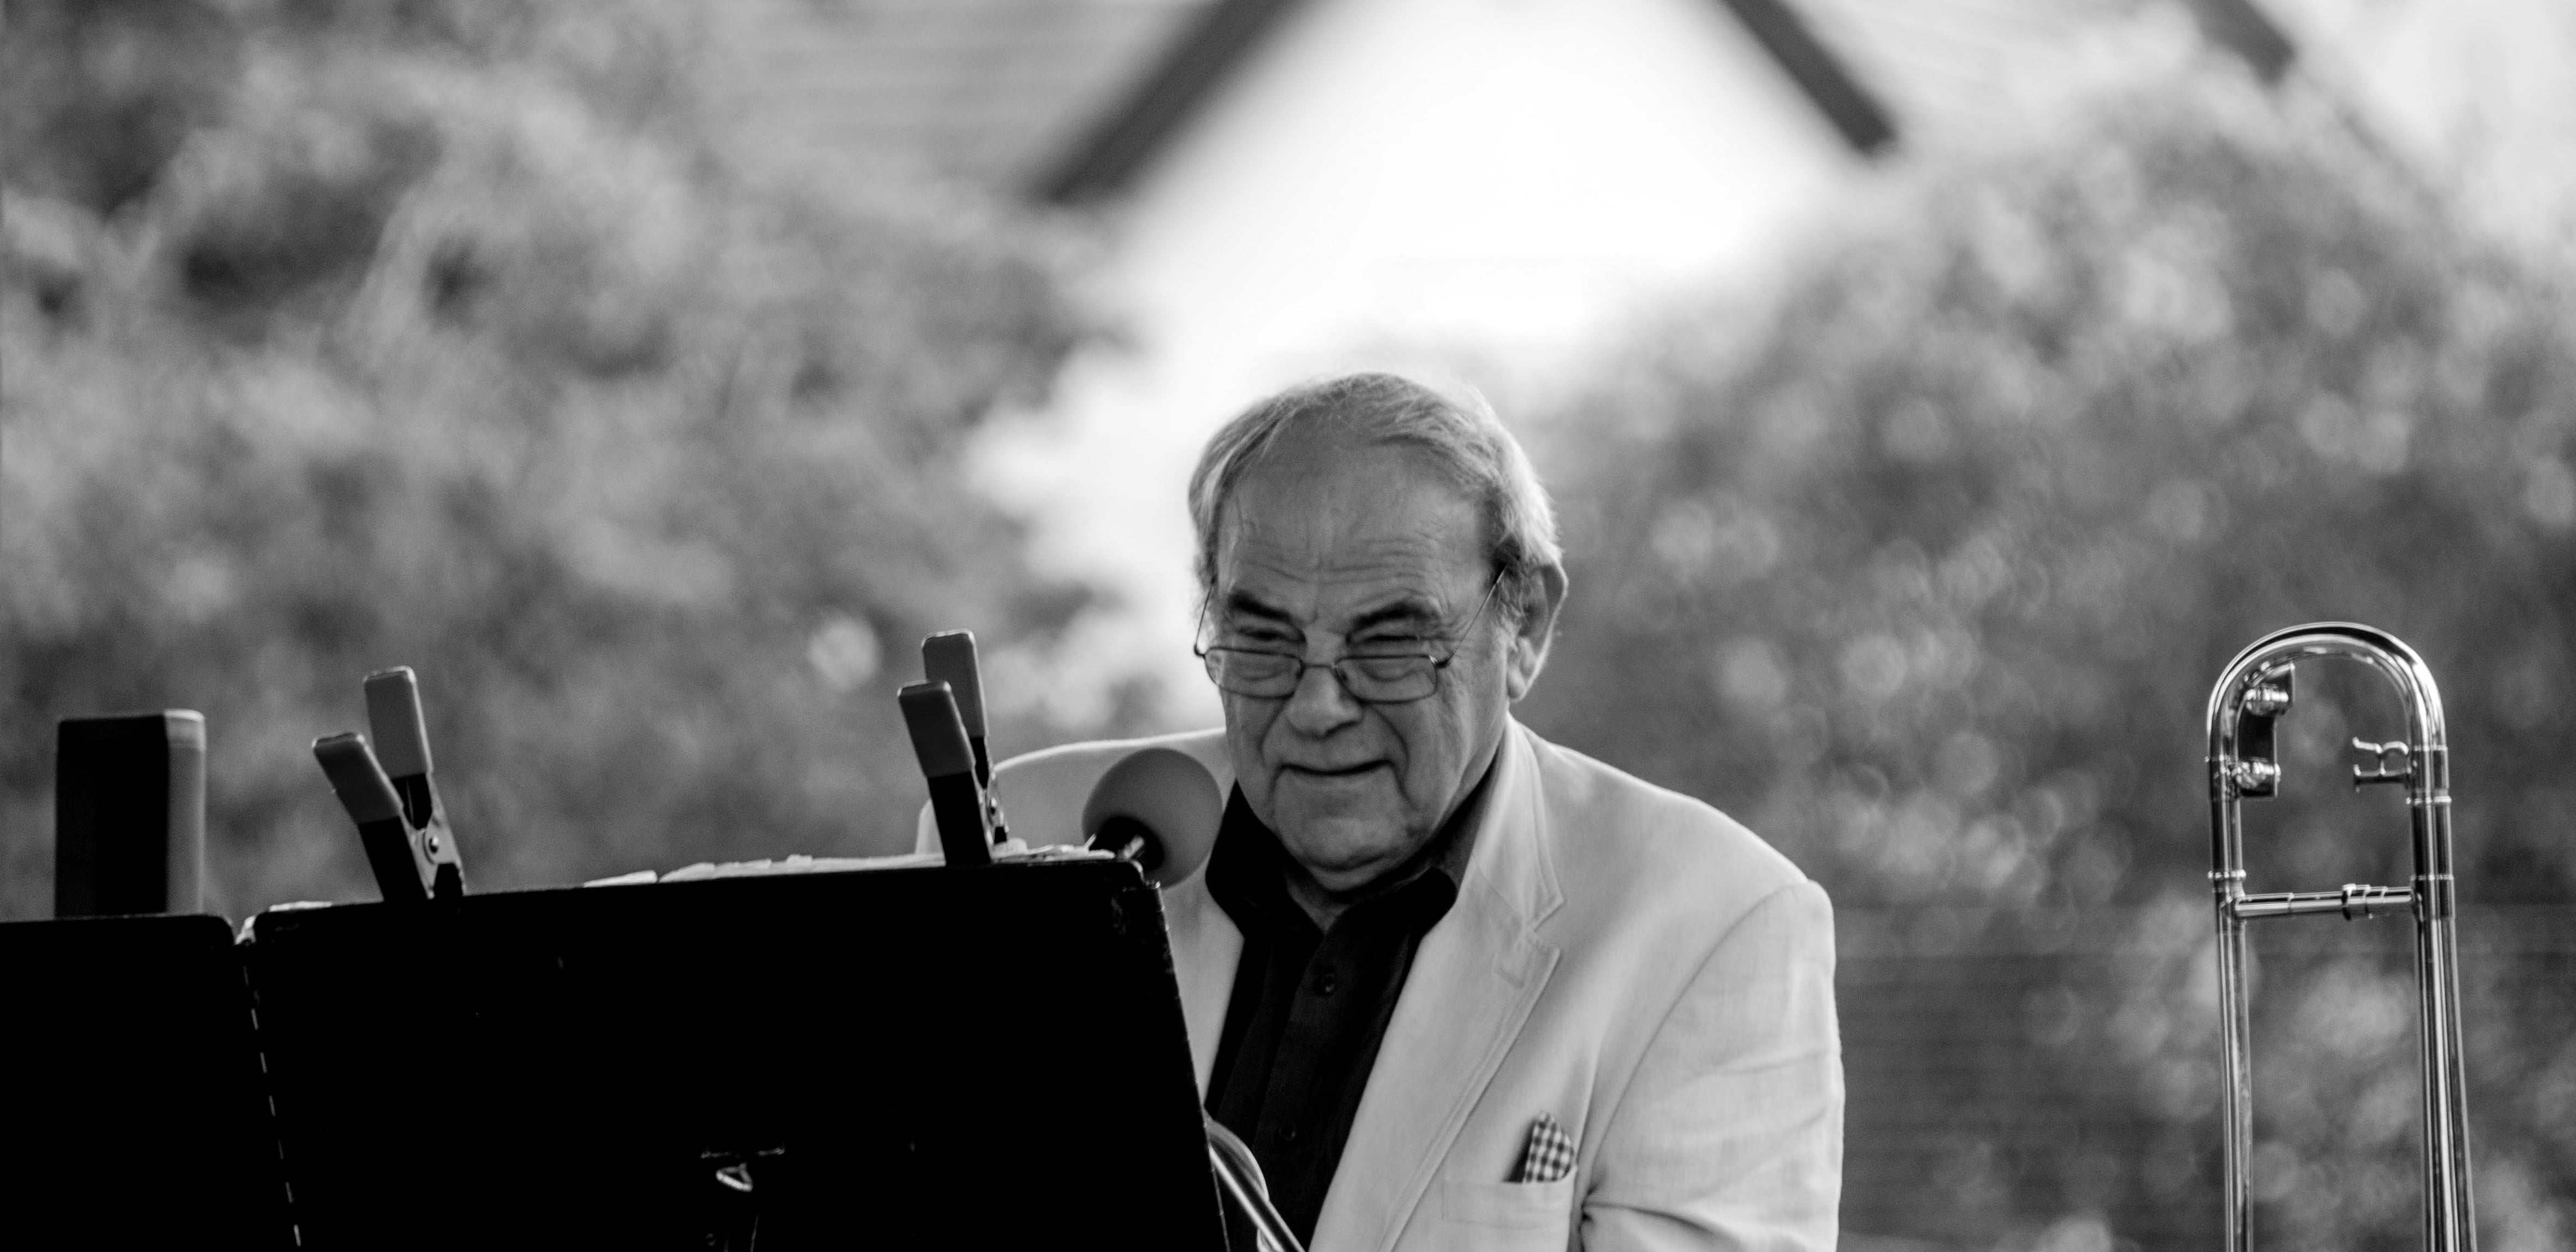 Tony Sheppard playing keyboard in an outdoor bandstand, with trees out of focus in the far distance. He wears a small smile of concentrated happiness. A trombone is visible by his left hand.